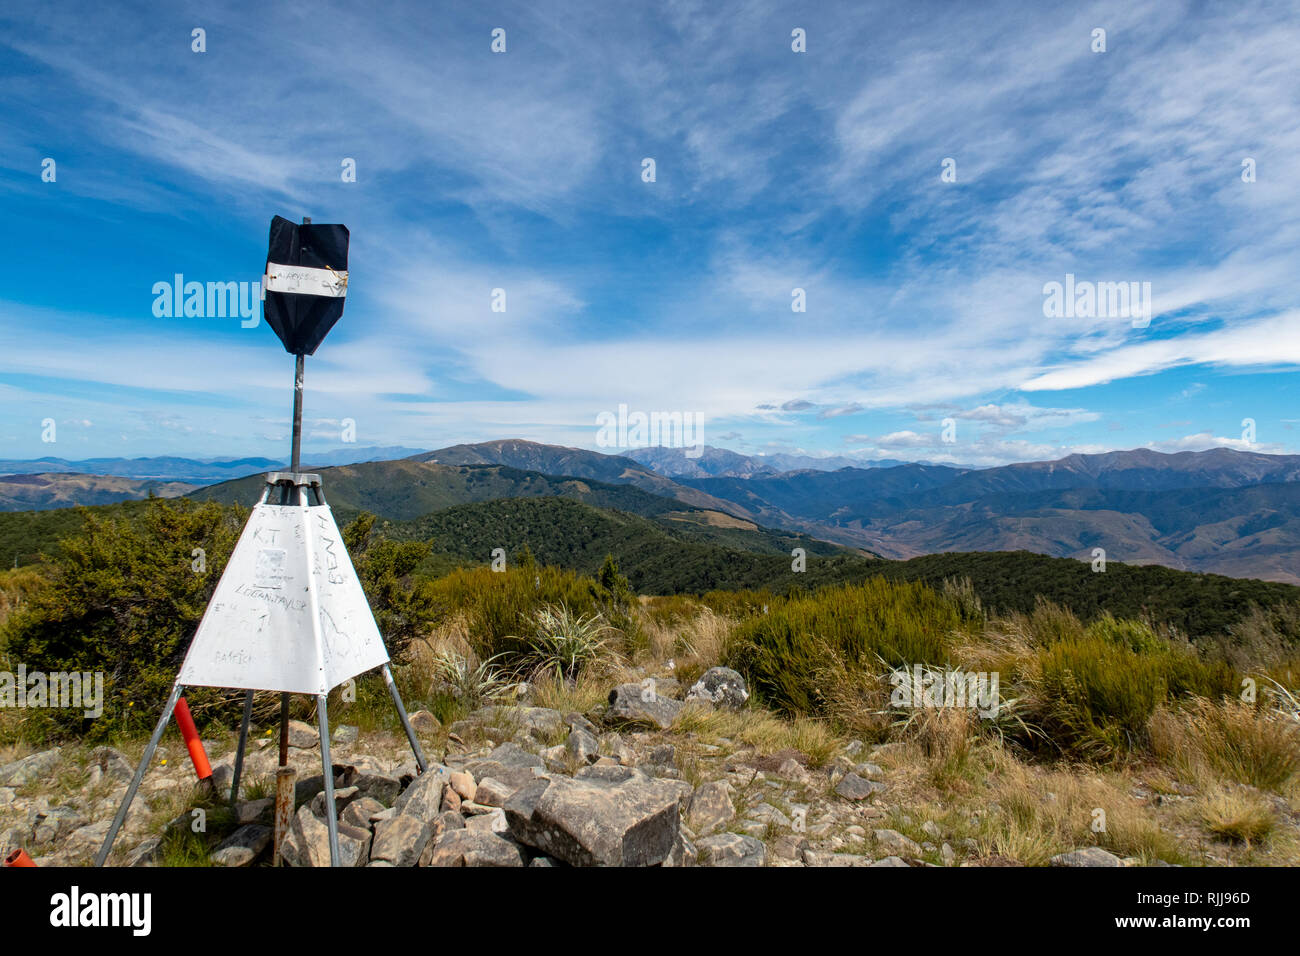 The trig station at the summit of Mt Richardson with a view of the surrounding mountains, New Zealand Stock Photo